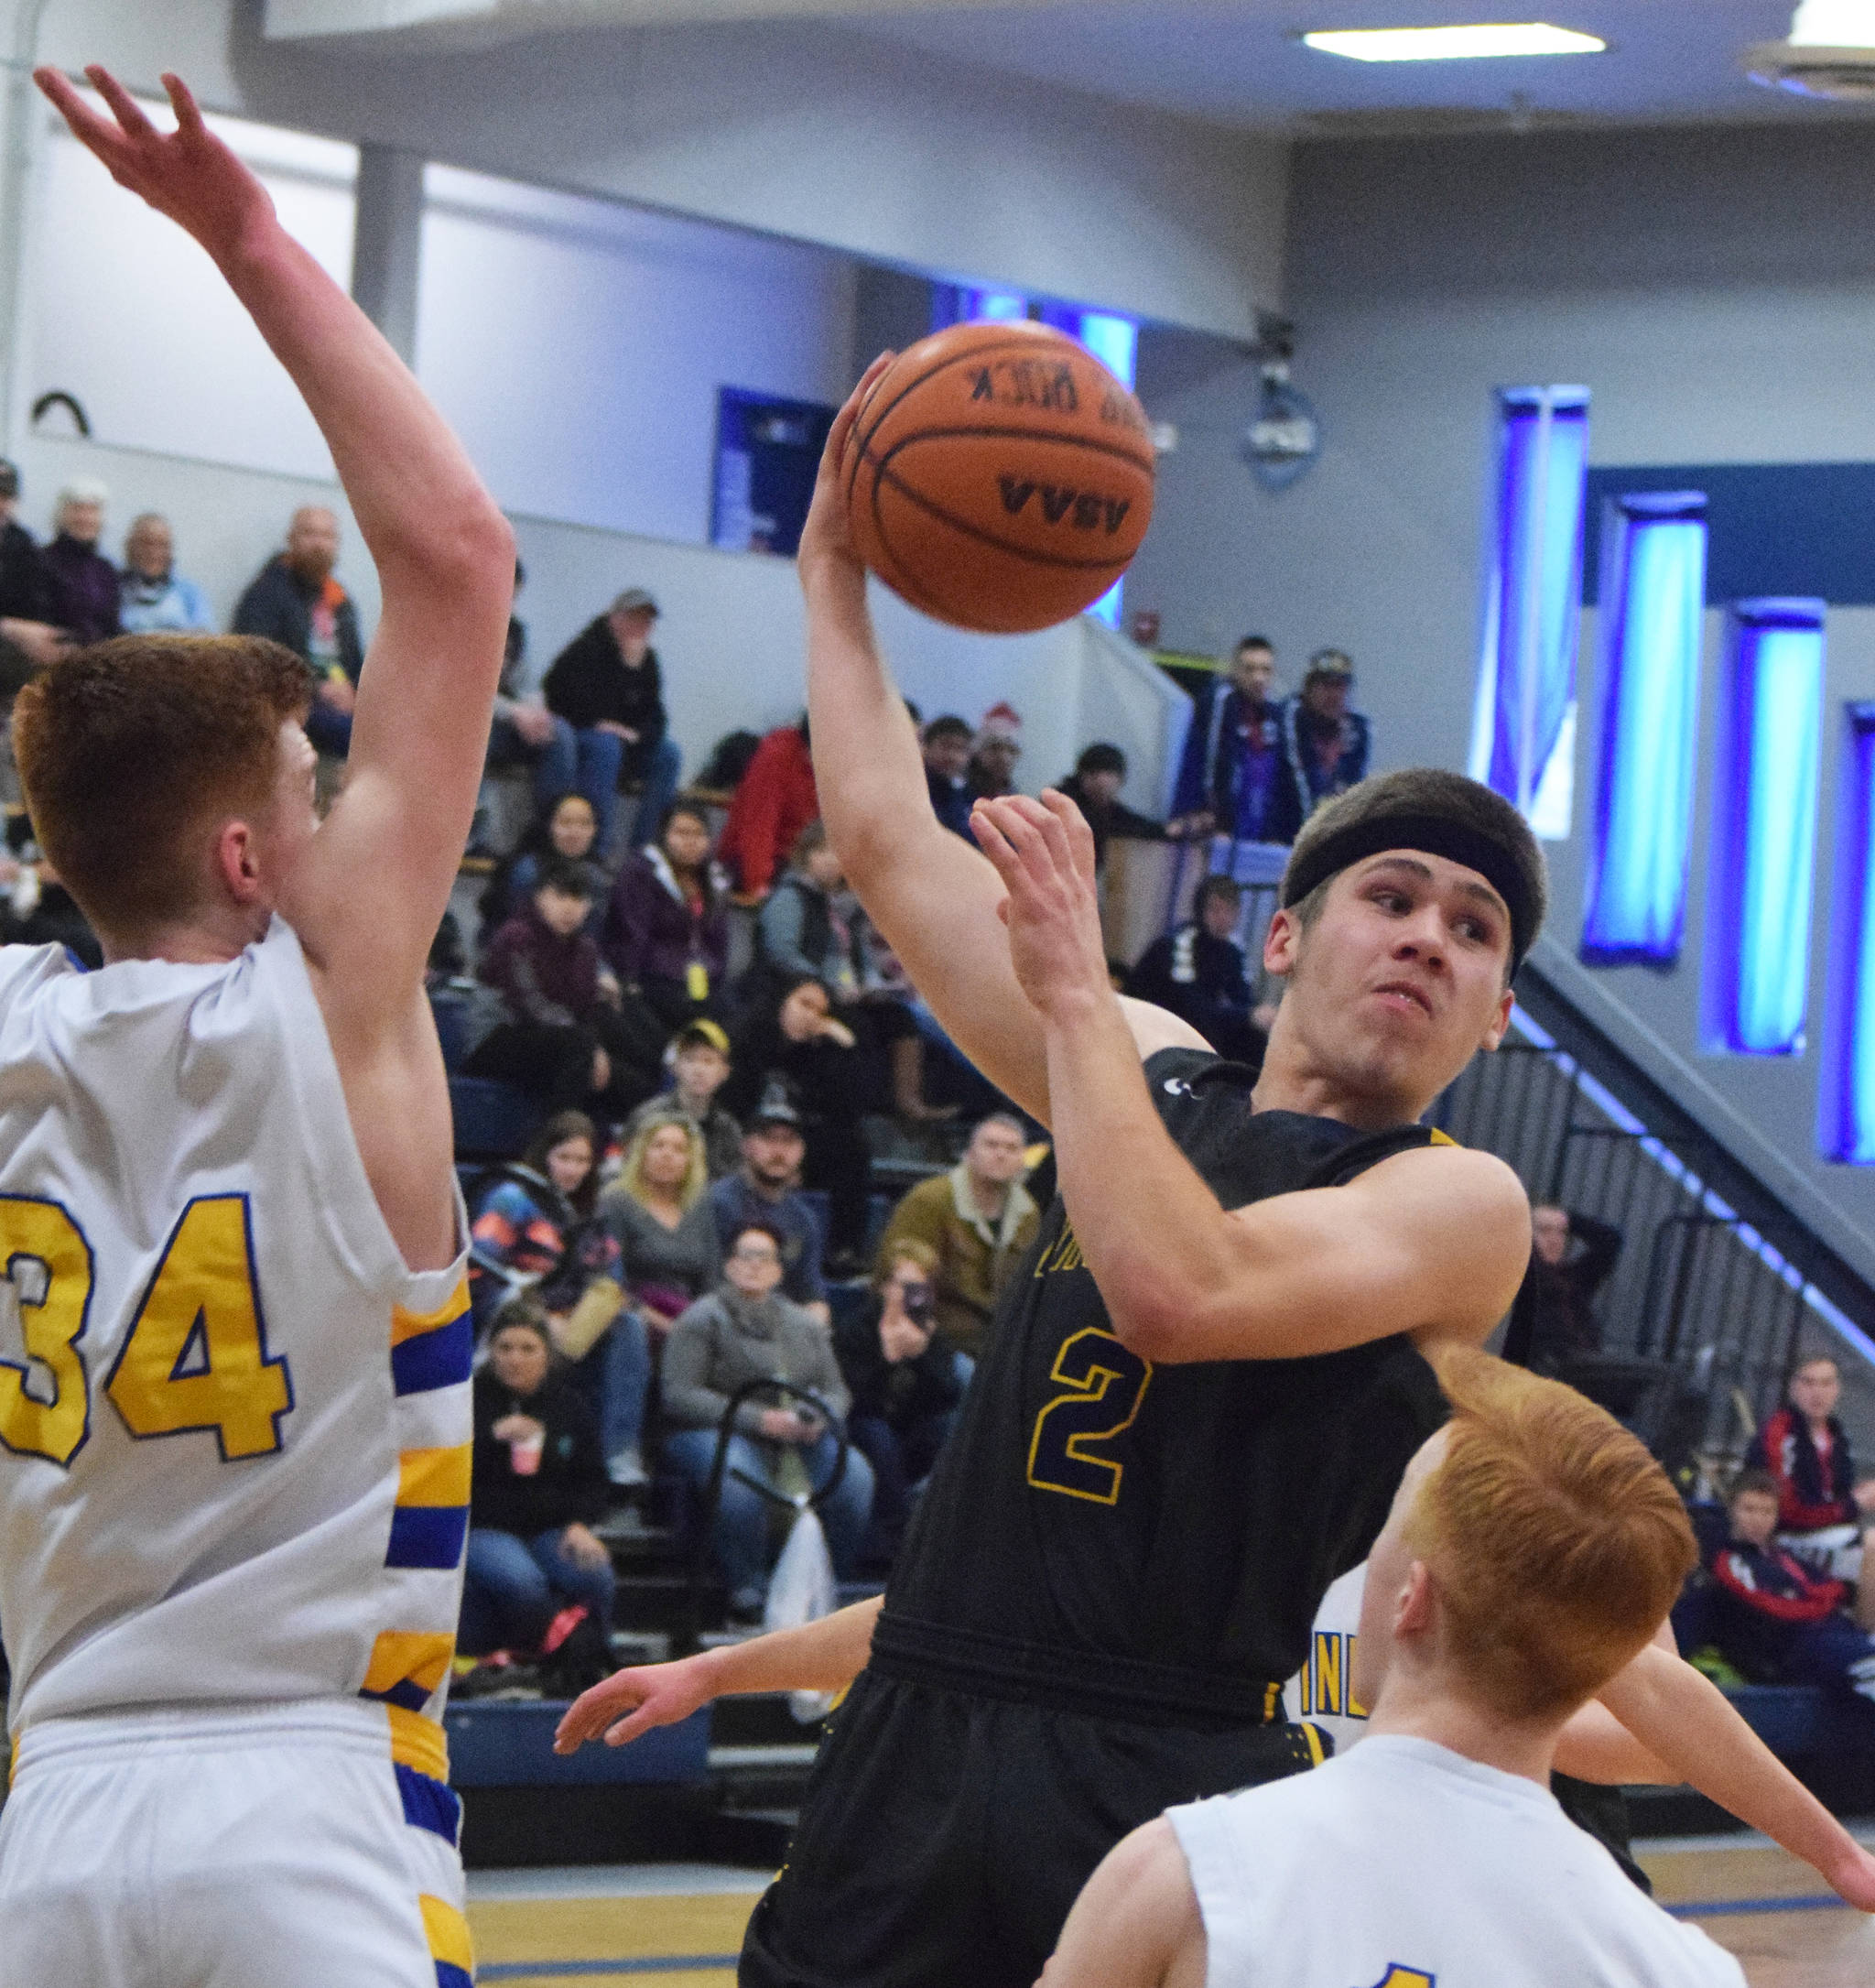 Ninilchik’s Cole Hadro (2) whips the ball to a teammate Wednesday against Cook Inlet Academy at the 2019 Peninsula Conference championship tournament at Cook Inlet Academy in Soldotna. (Photo by Joey Klecka/Peninsula Clarion)